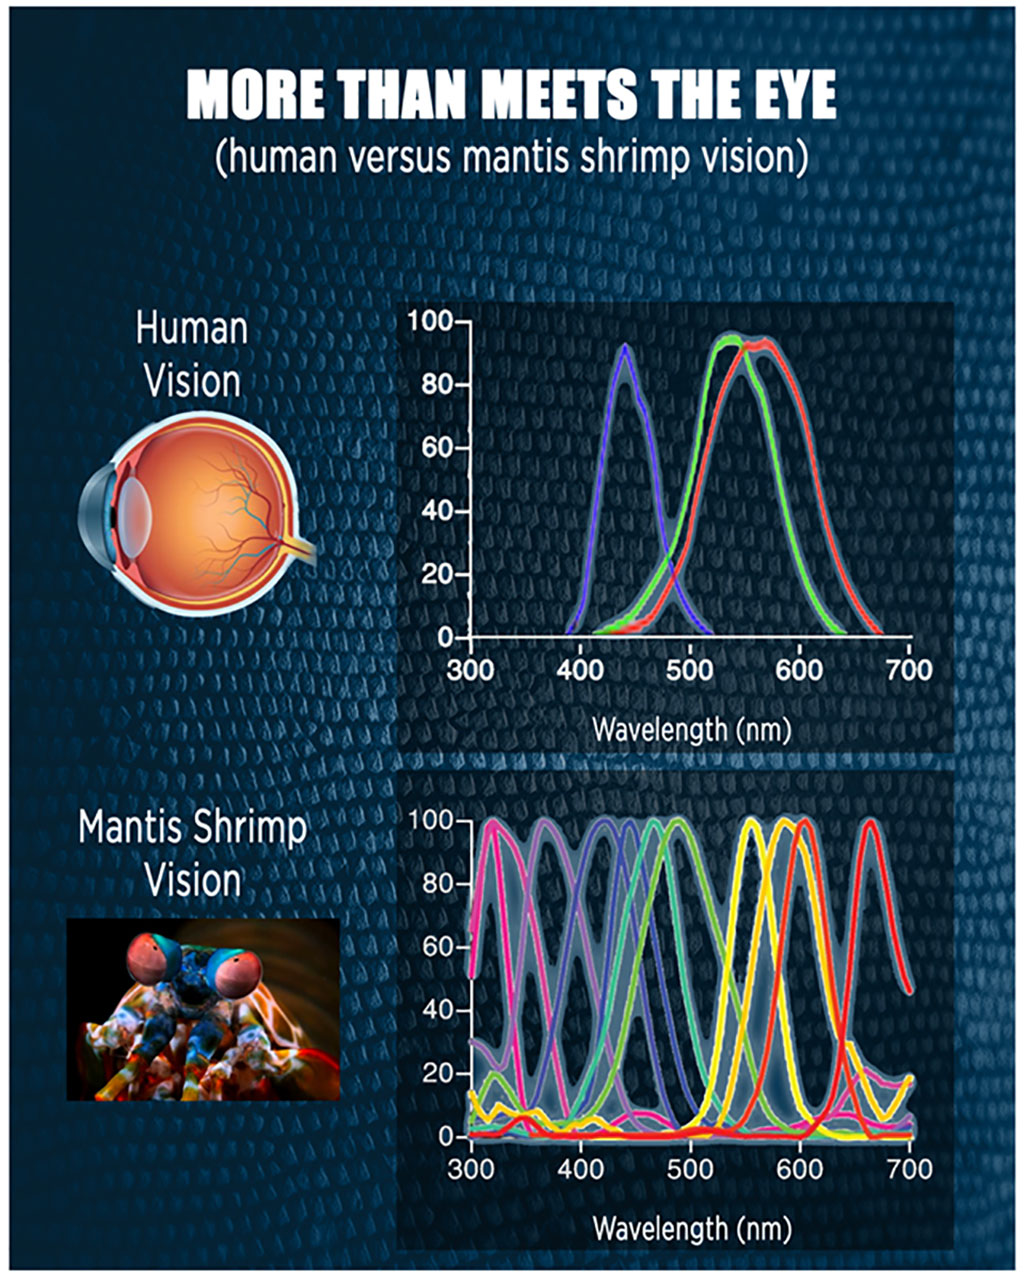 Image: Mantis shrimp can perceive a wider range of colors than humans (Photo courtesy of UIL)